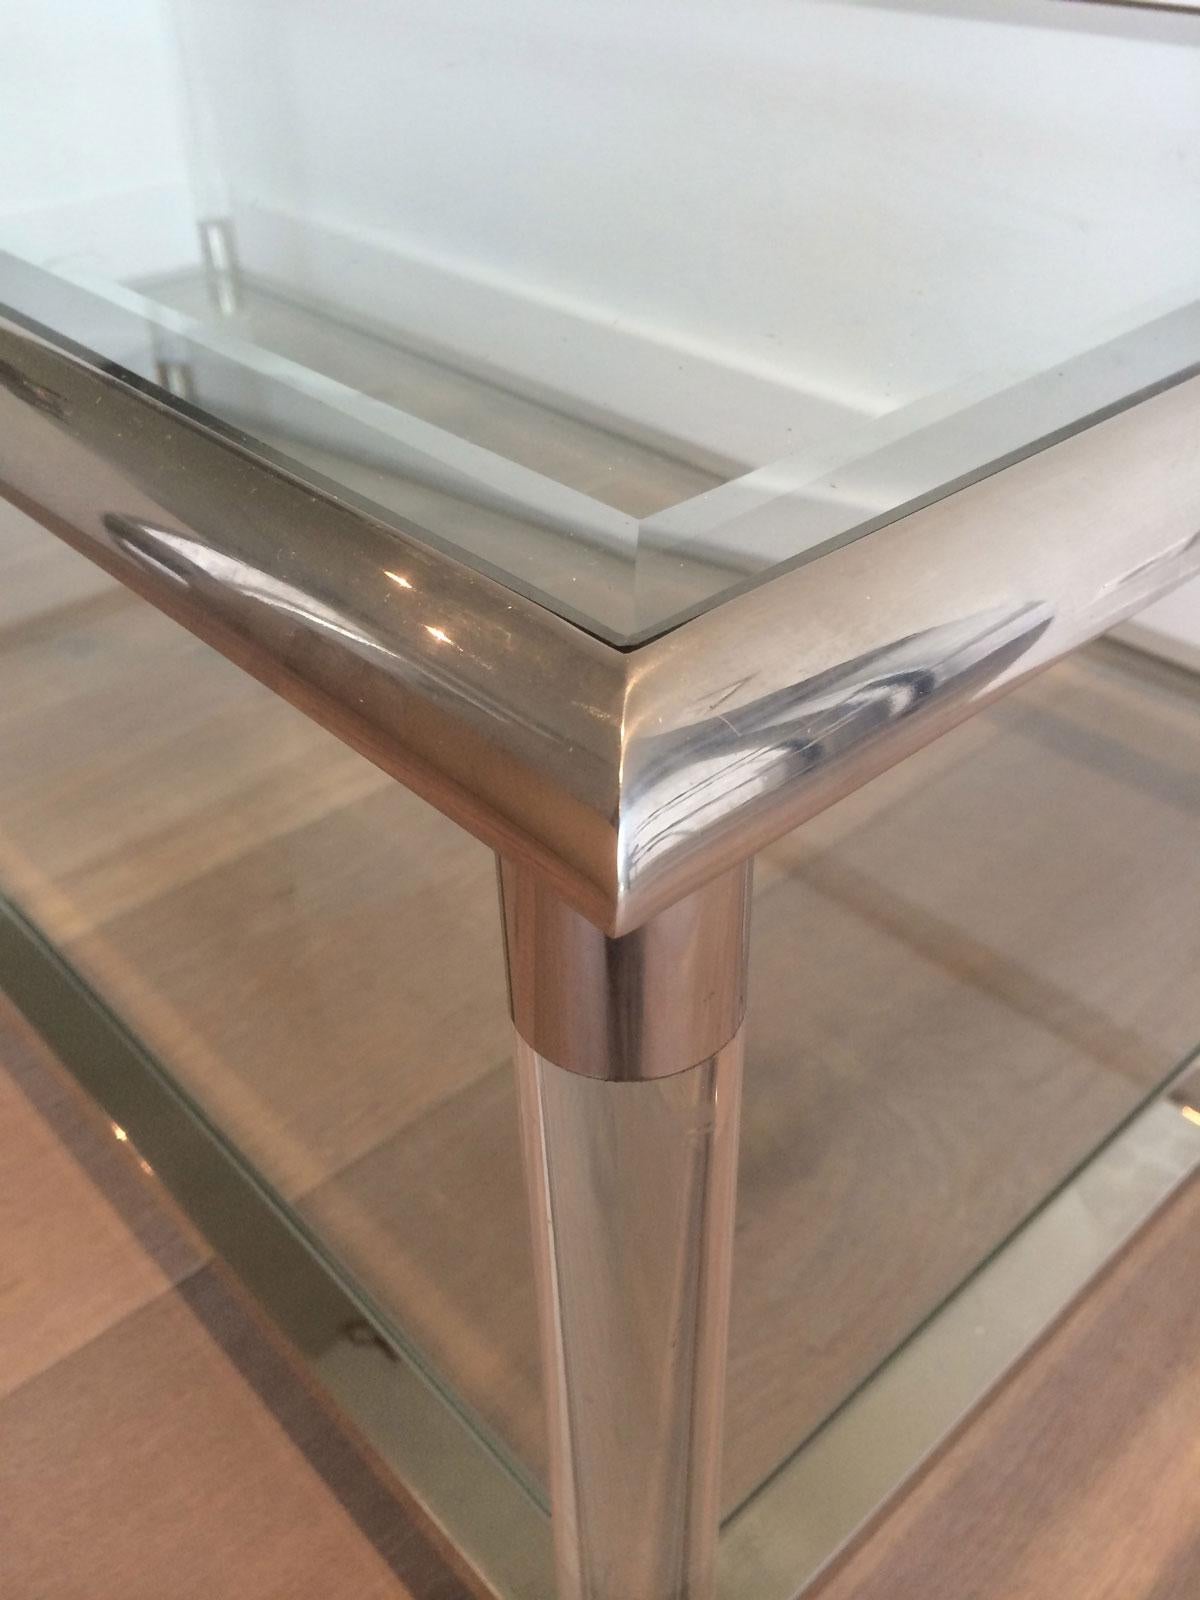 Late 20th Century Large Chrome and Lucite Coffee Table, French, circa 1970